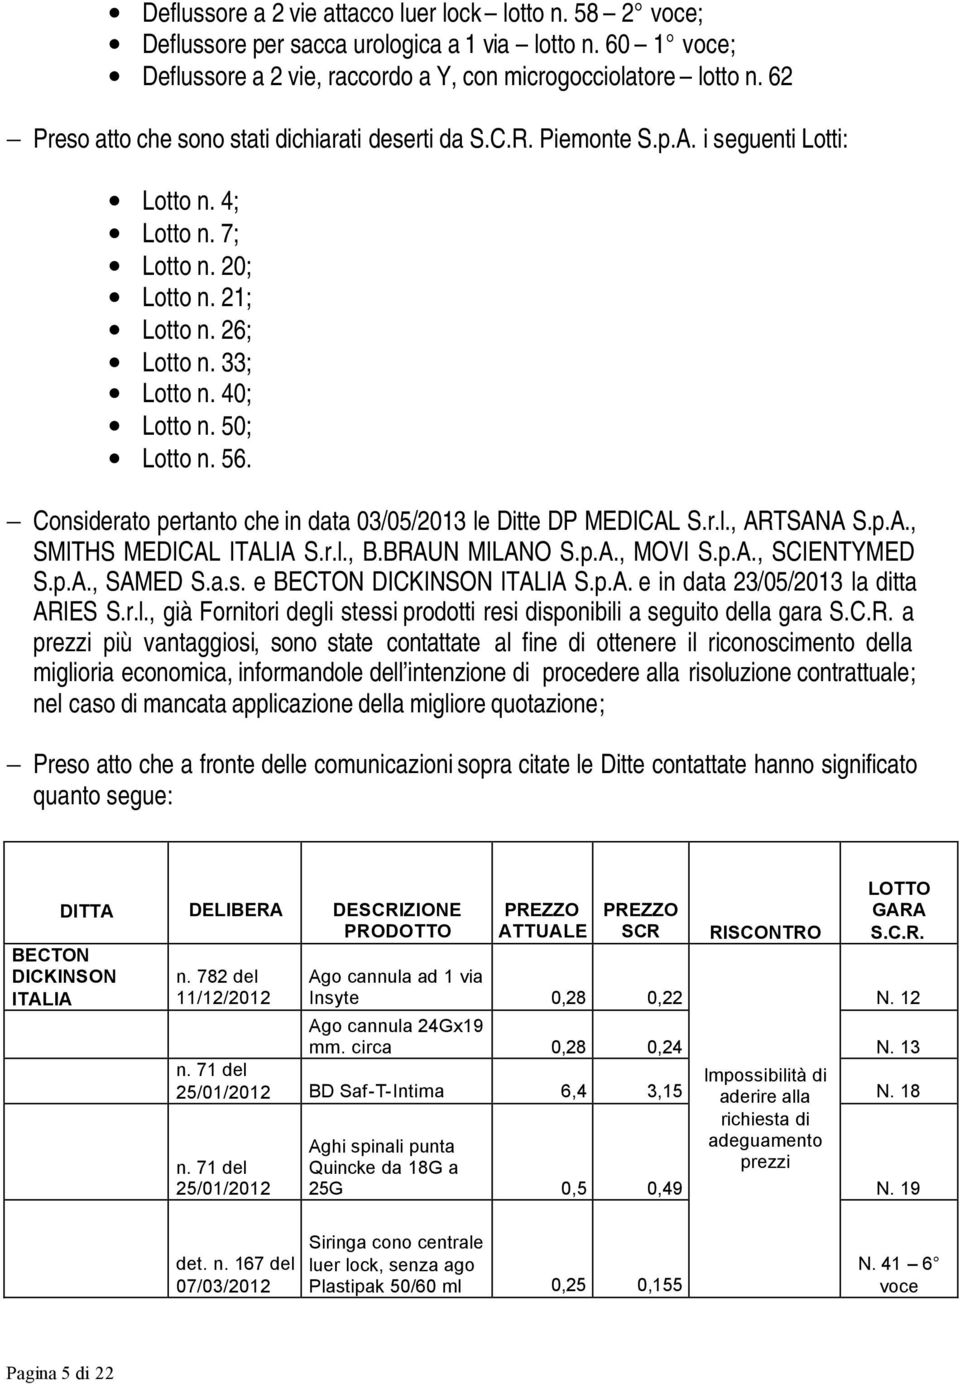 50; Lotto n. 56. Considerato tanto che in data 03/05/2013 le Ditte DP MEDICAL S.r.l., ARTSANA S.p.A., SMITHS MEDICAL ITALIA S.r.l., B.BRAUN MILANO S.p.A., MOVI S.p.A., SCIENTYMED S.p.A., SAMED S.a.s. e BECTON DICKINSON ITALIA S.